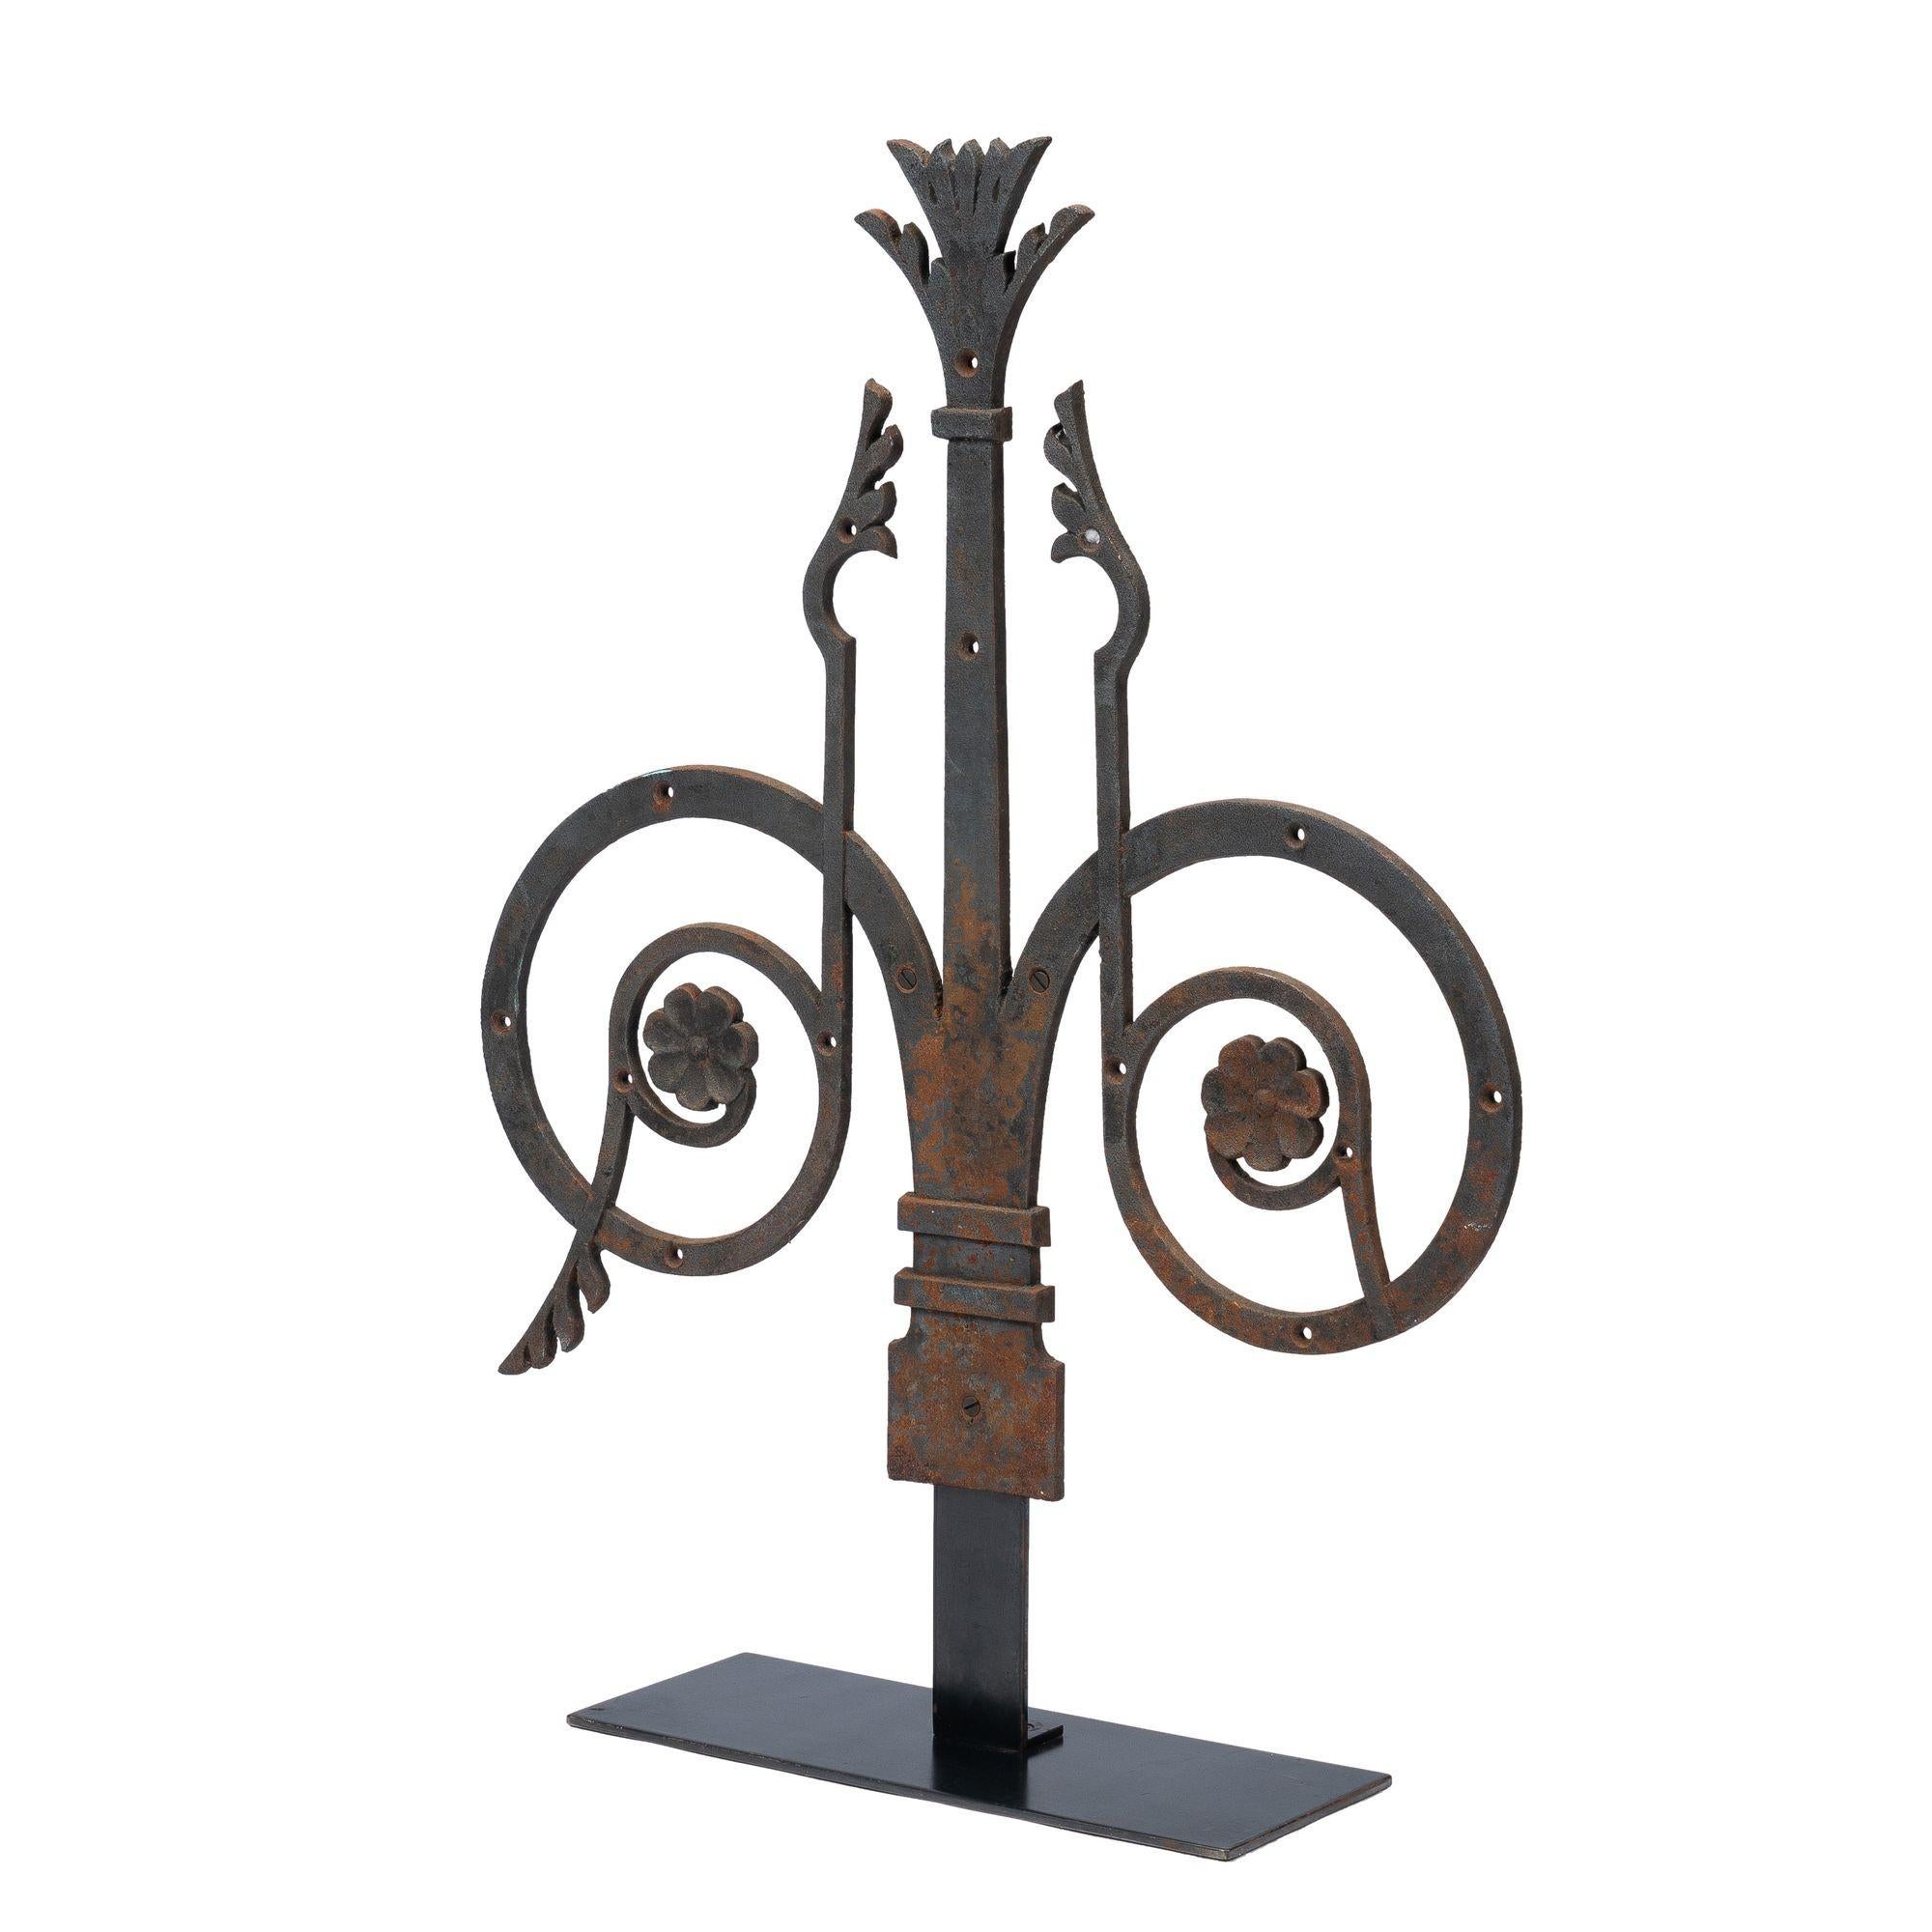 American cast iron strapwork style carriage door hinge in the Romanesque taste. Mounted on a custom iron stand.
American, circa 1885.
Condition: The hinge has a slight patina of rust and some surface marks are visible throughout. Wear commensurate